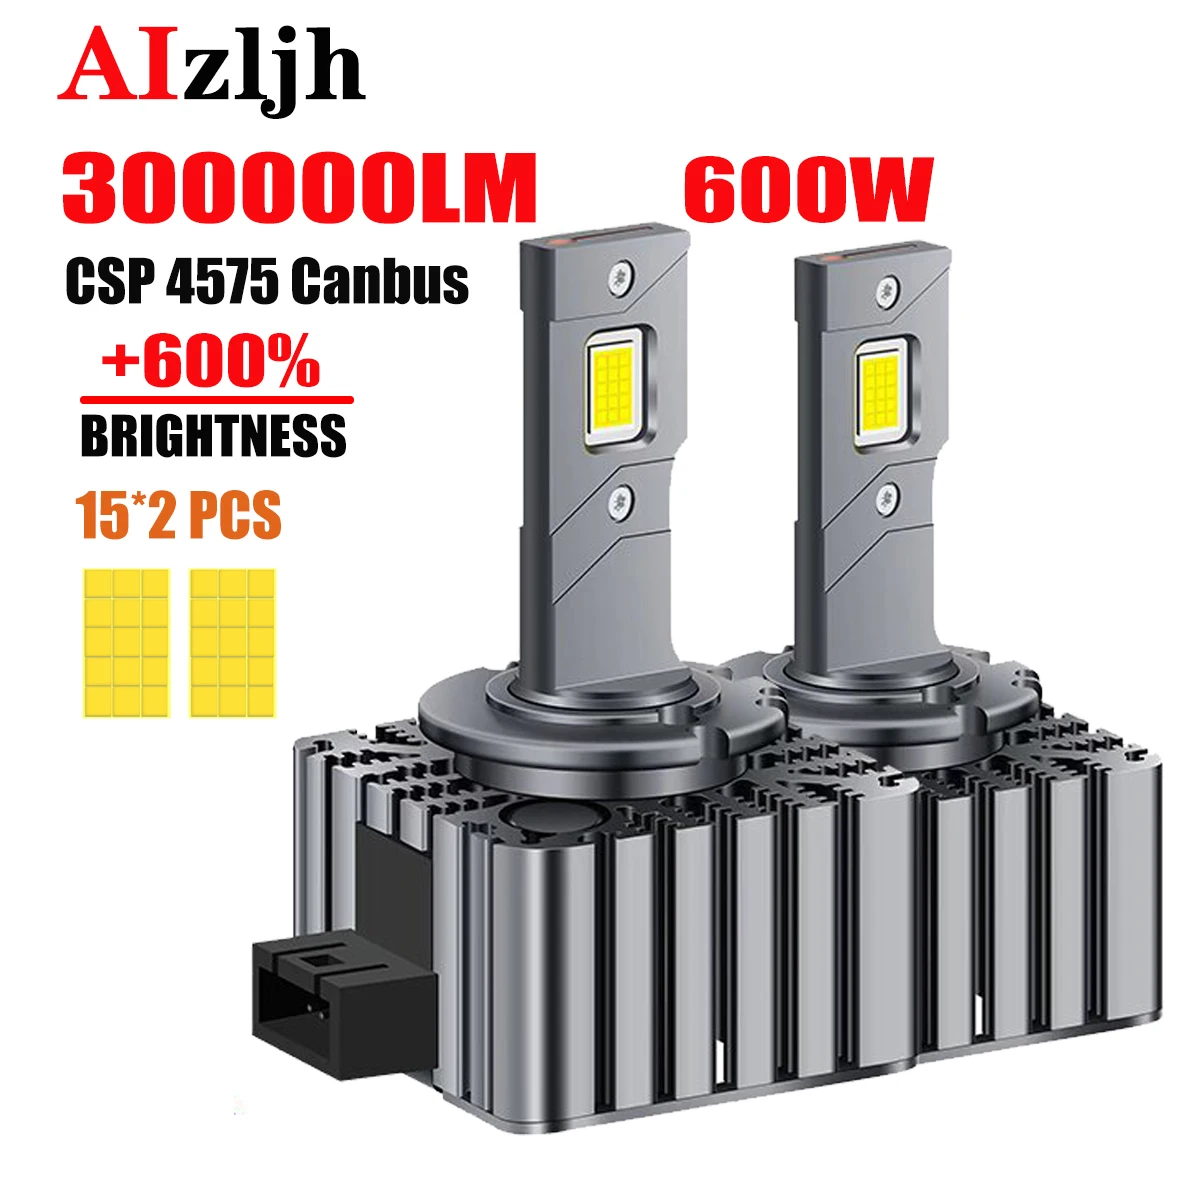 

AIZLJH D1S D2S D3S D4S 300000LM 600W 6000K Car LED Headlight Copper Tube High Bulb Lamps CSP 4575 Canbus Headlamps 12V Lights